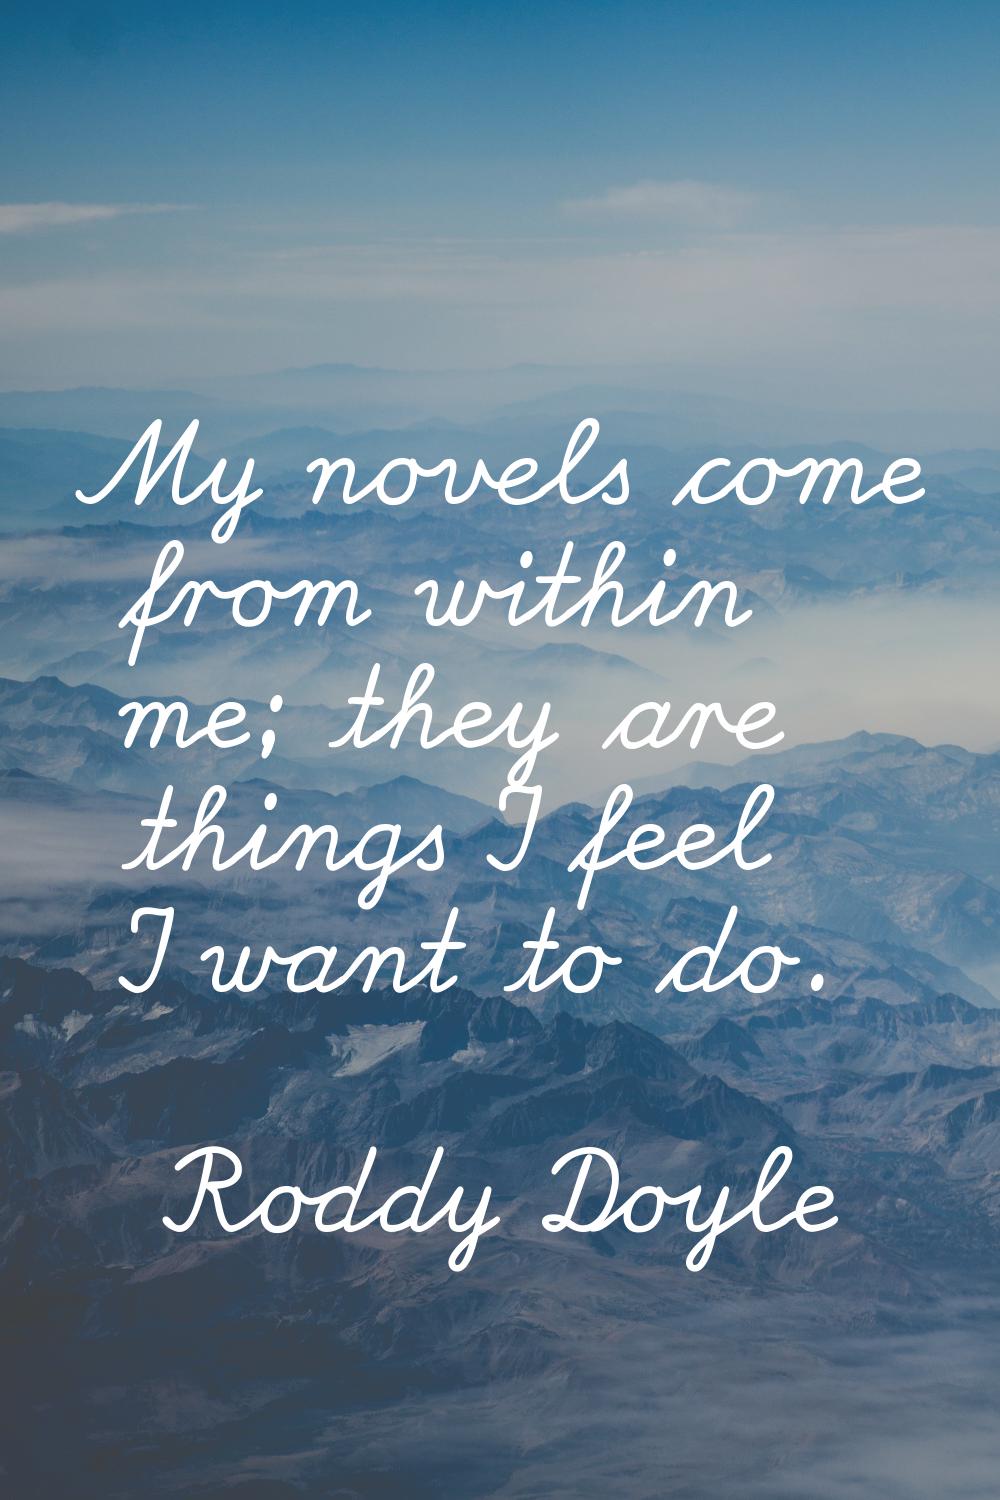 My novels come from within me; they are things I feel I want to do.